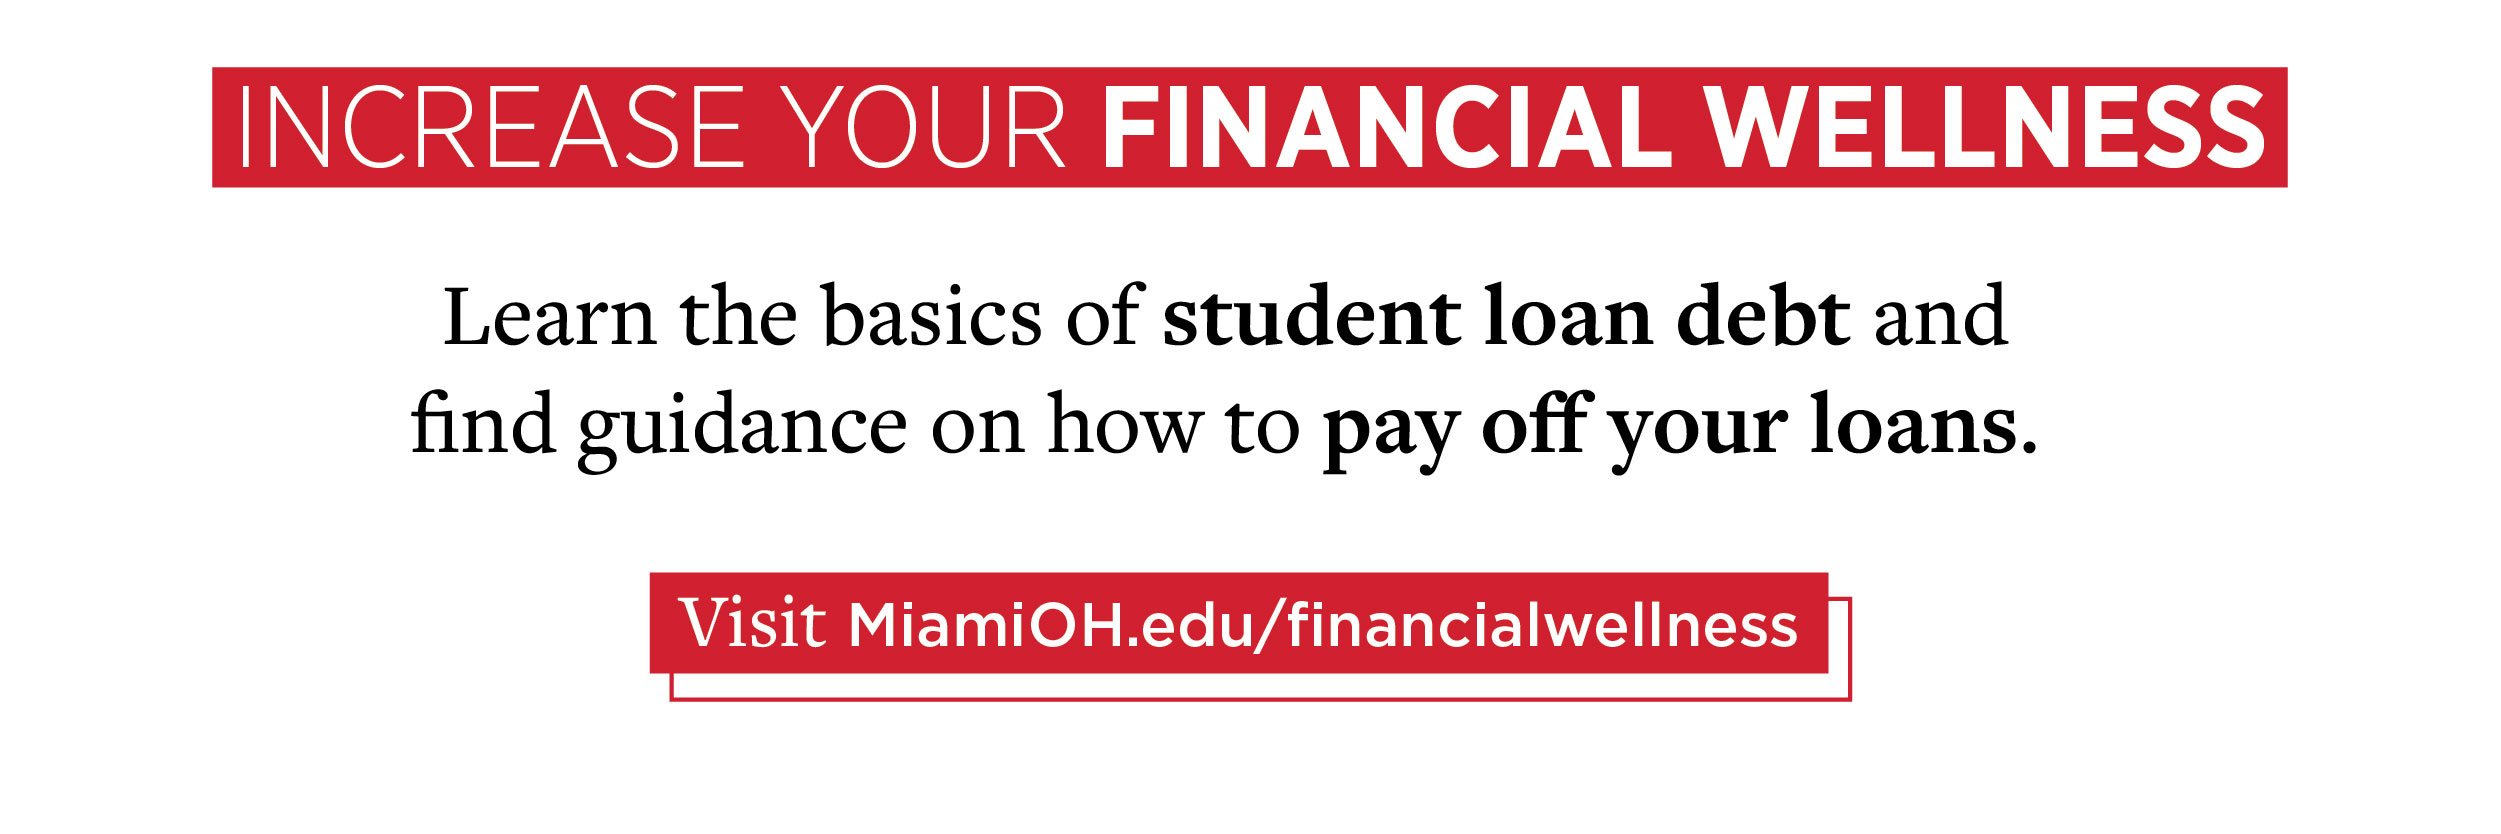 Increase your financial literacy. Learn the basics of student load debt and find guidance on how to pay off your loans. Visit MiamiOH.edu/financialwellness.